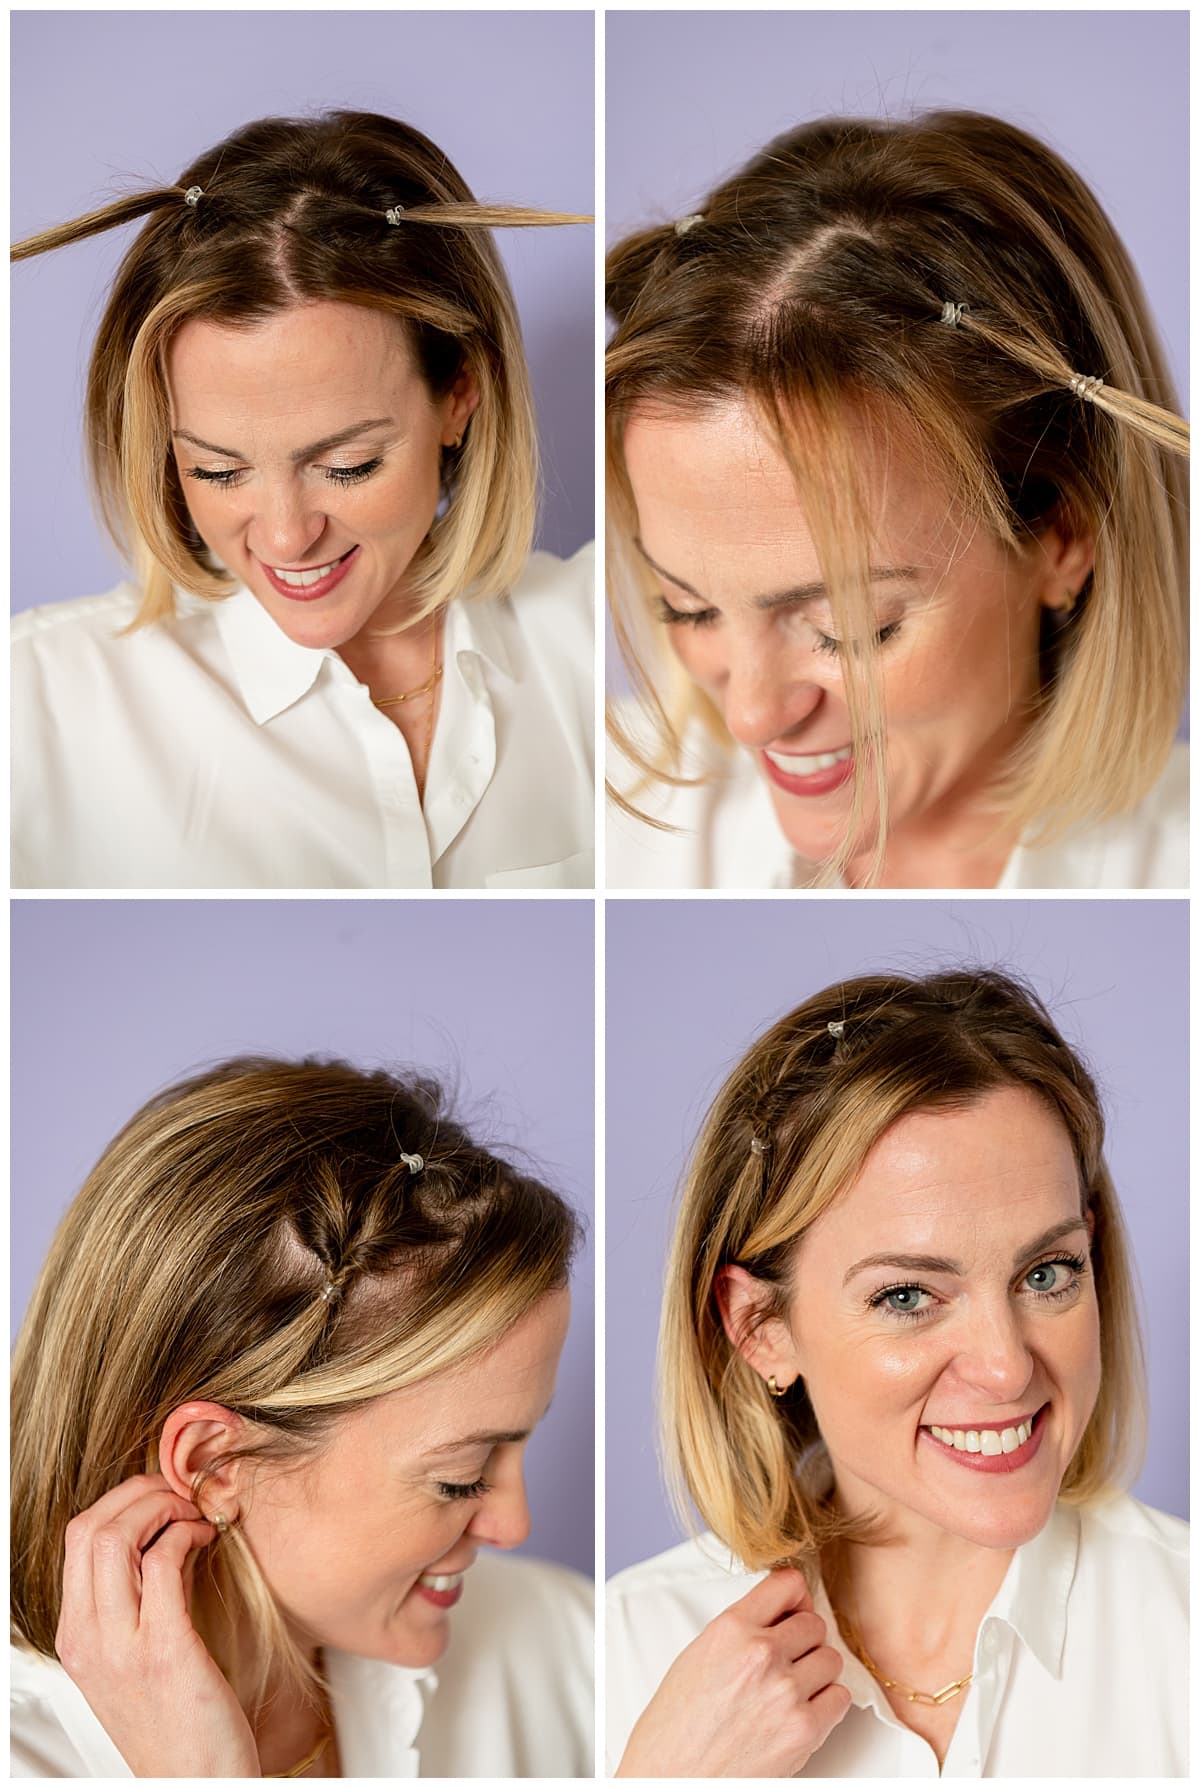 Step-by-step photos of how to do a cute hairstyle for short hair.